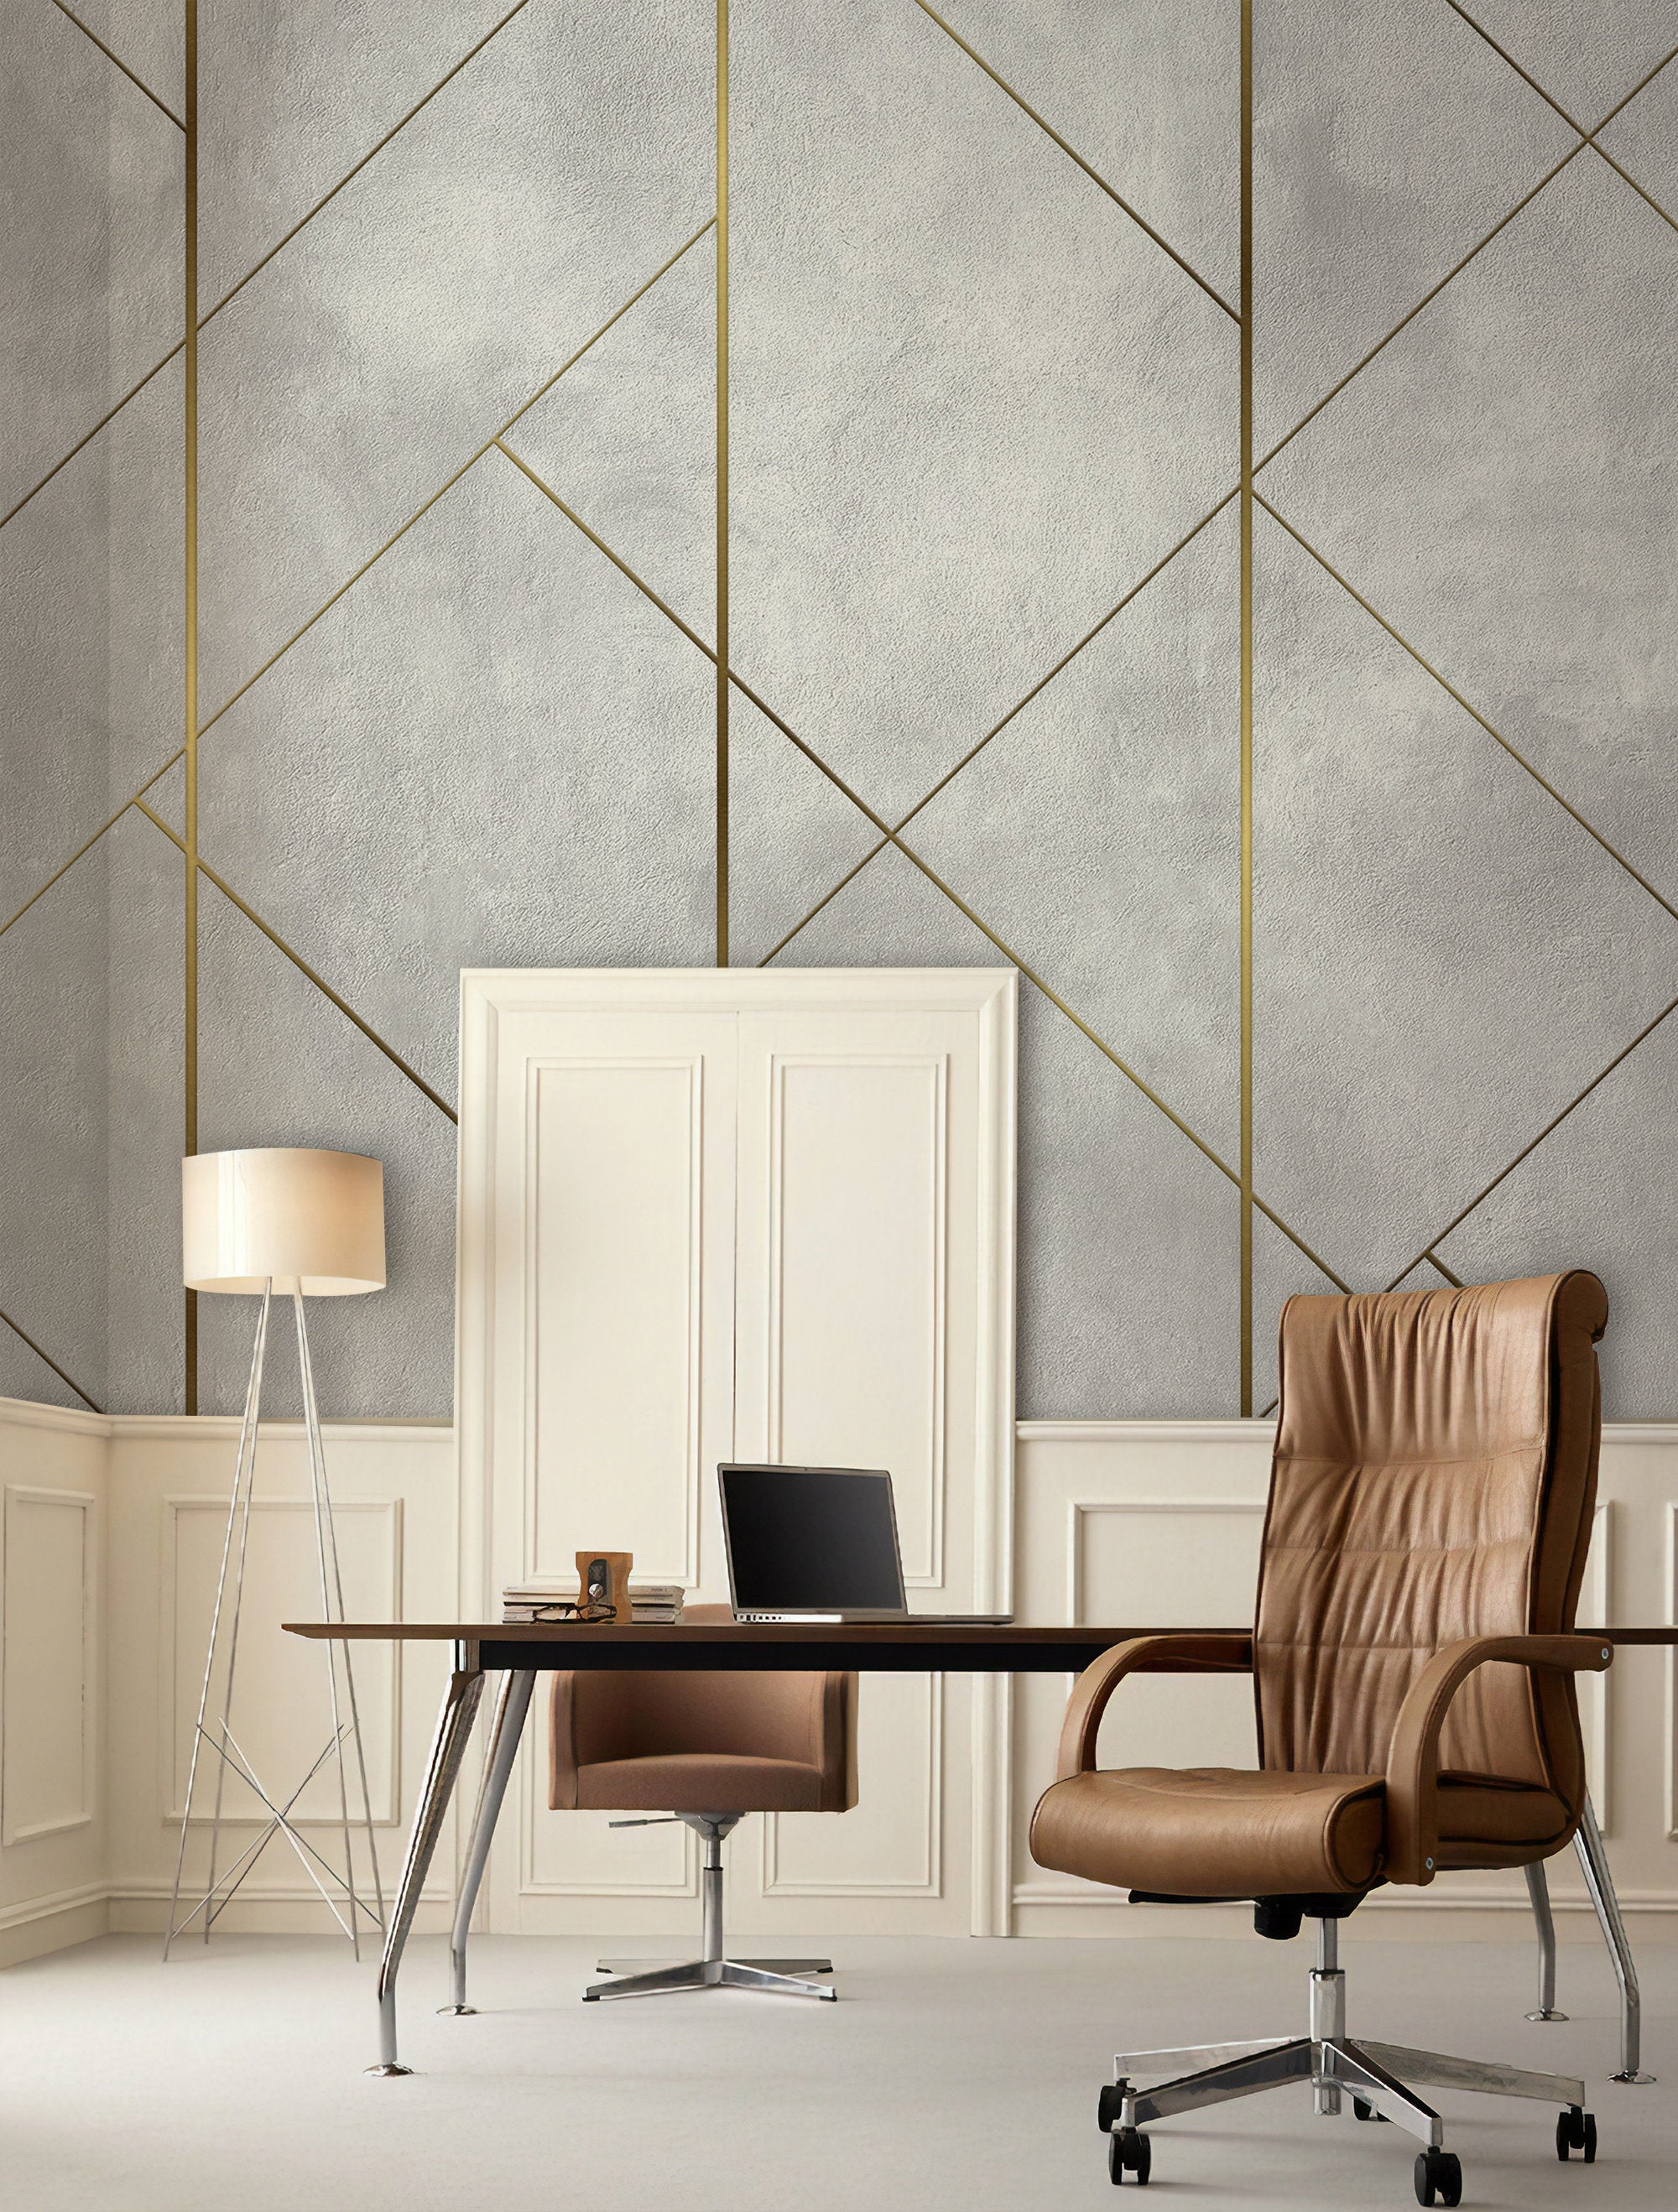 Abstract Geometric Modern Design Luxury Wallpaper Self Adhesive Peel and Stick Wall Sticker Wall Decoration Scandinavian Removable